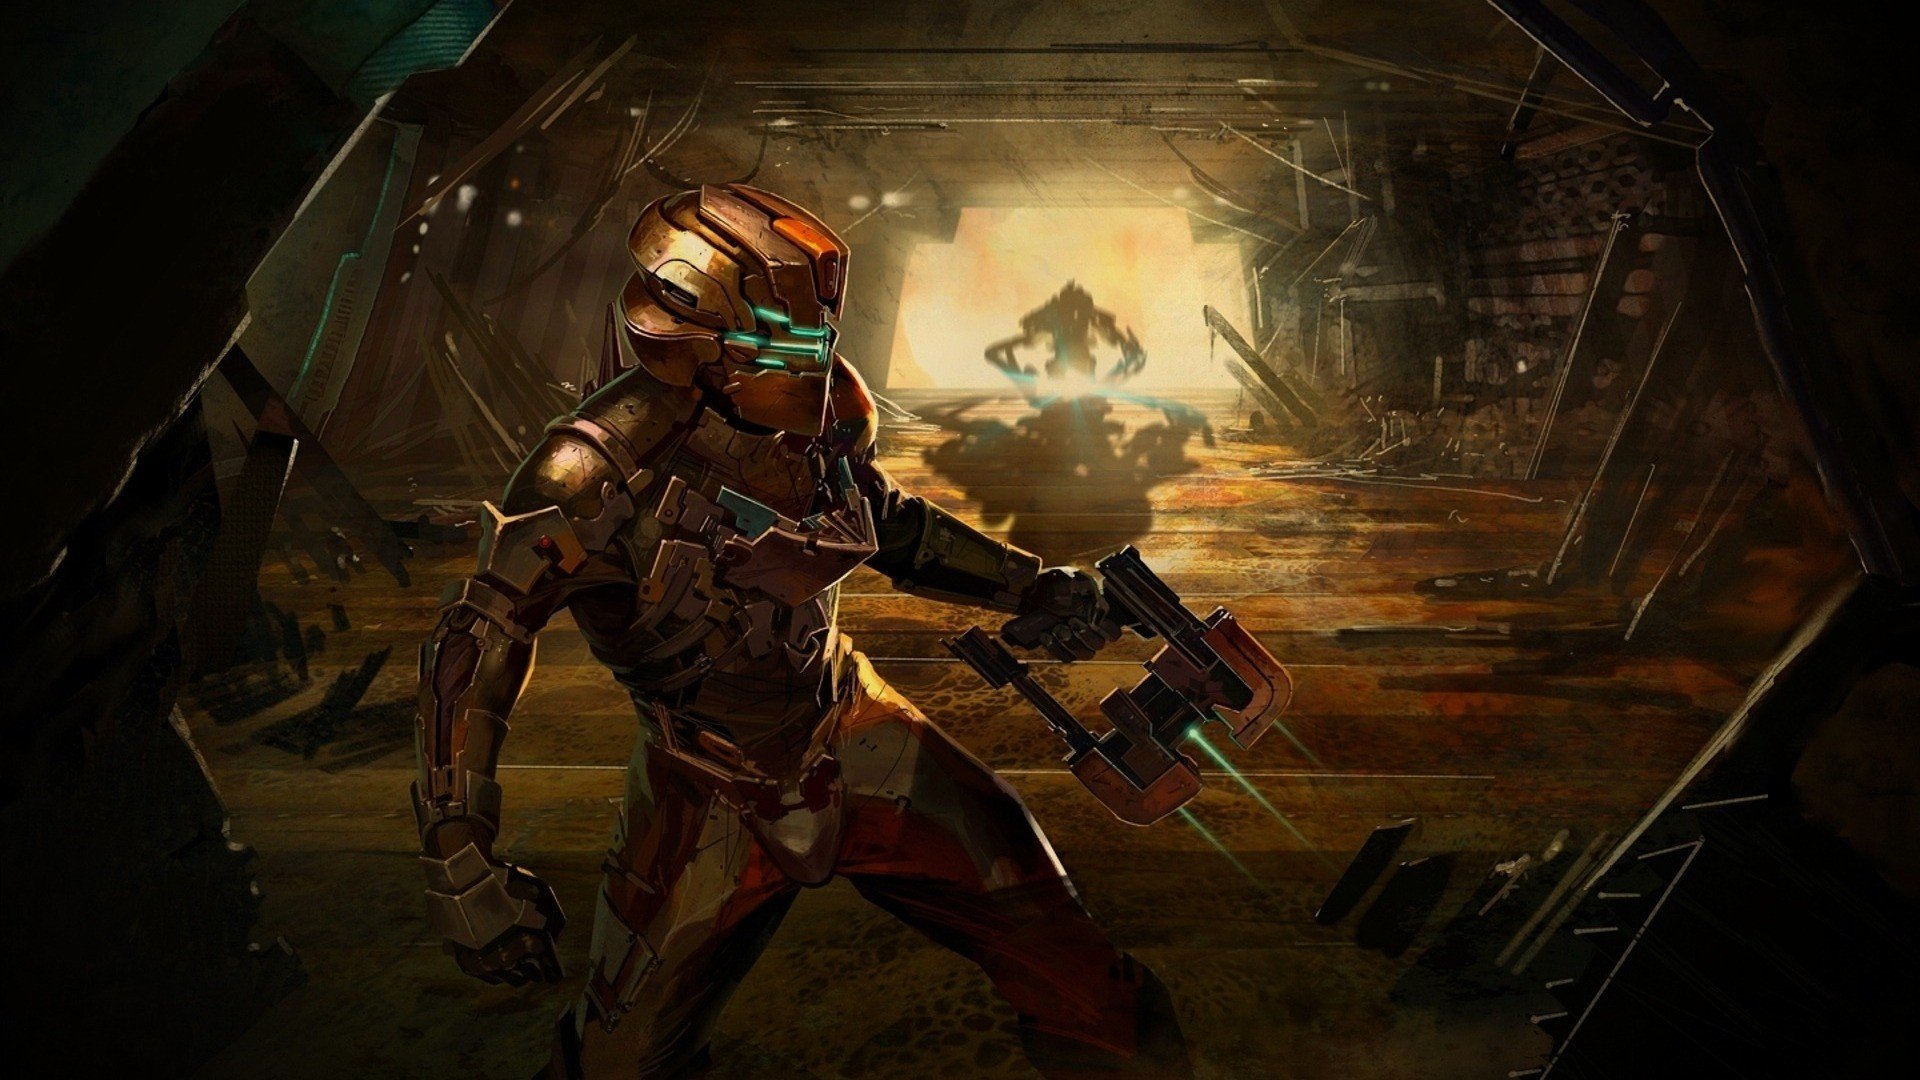 game like dead space